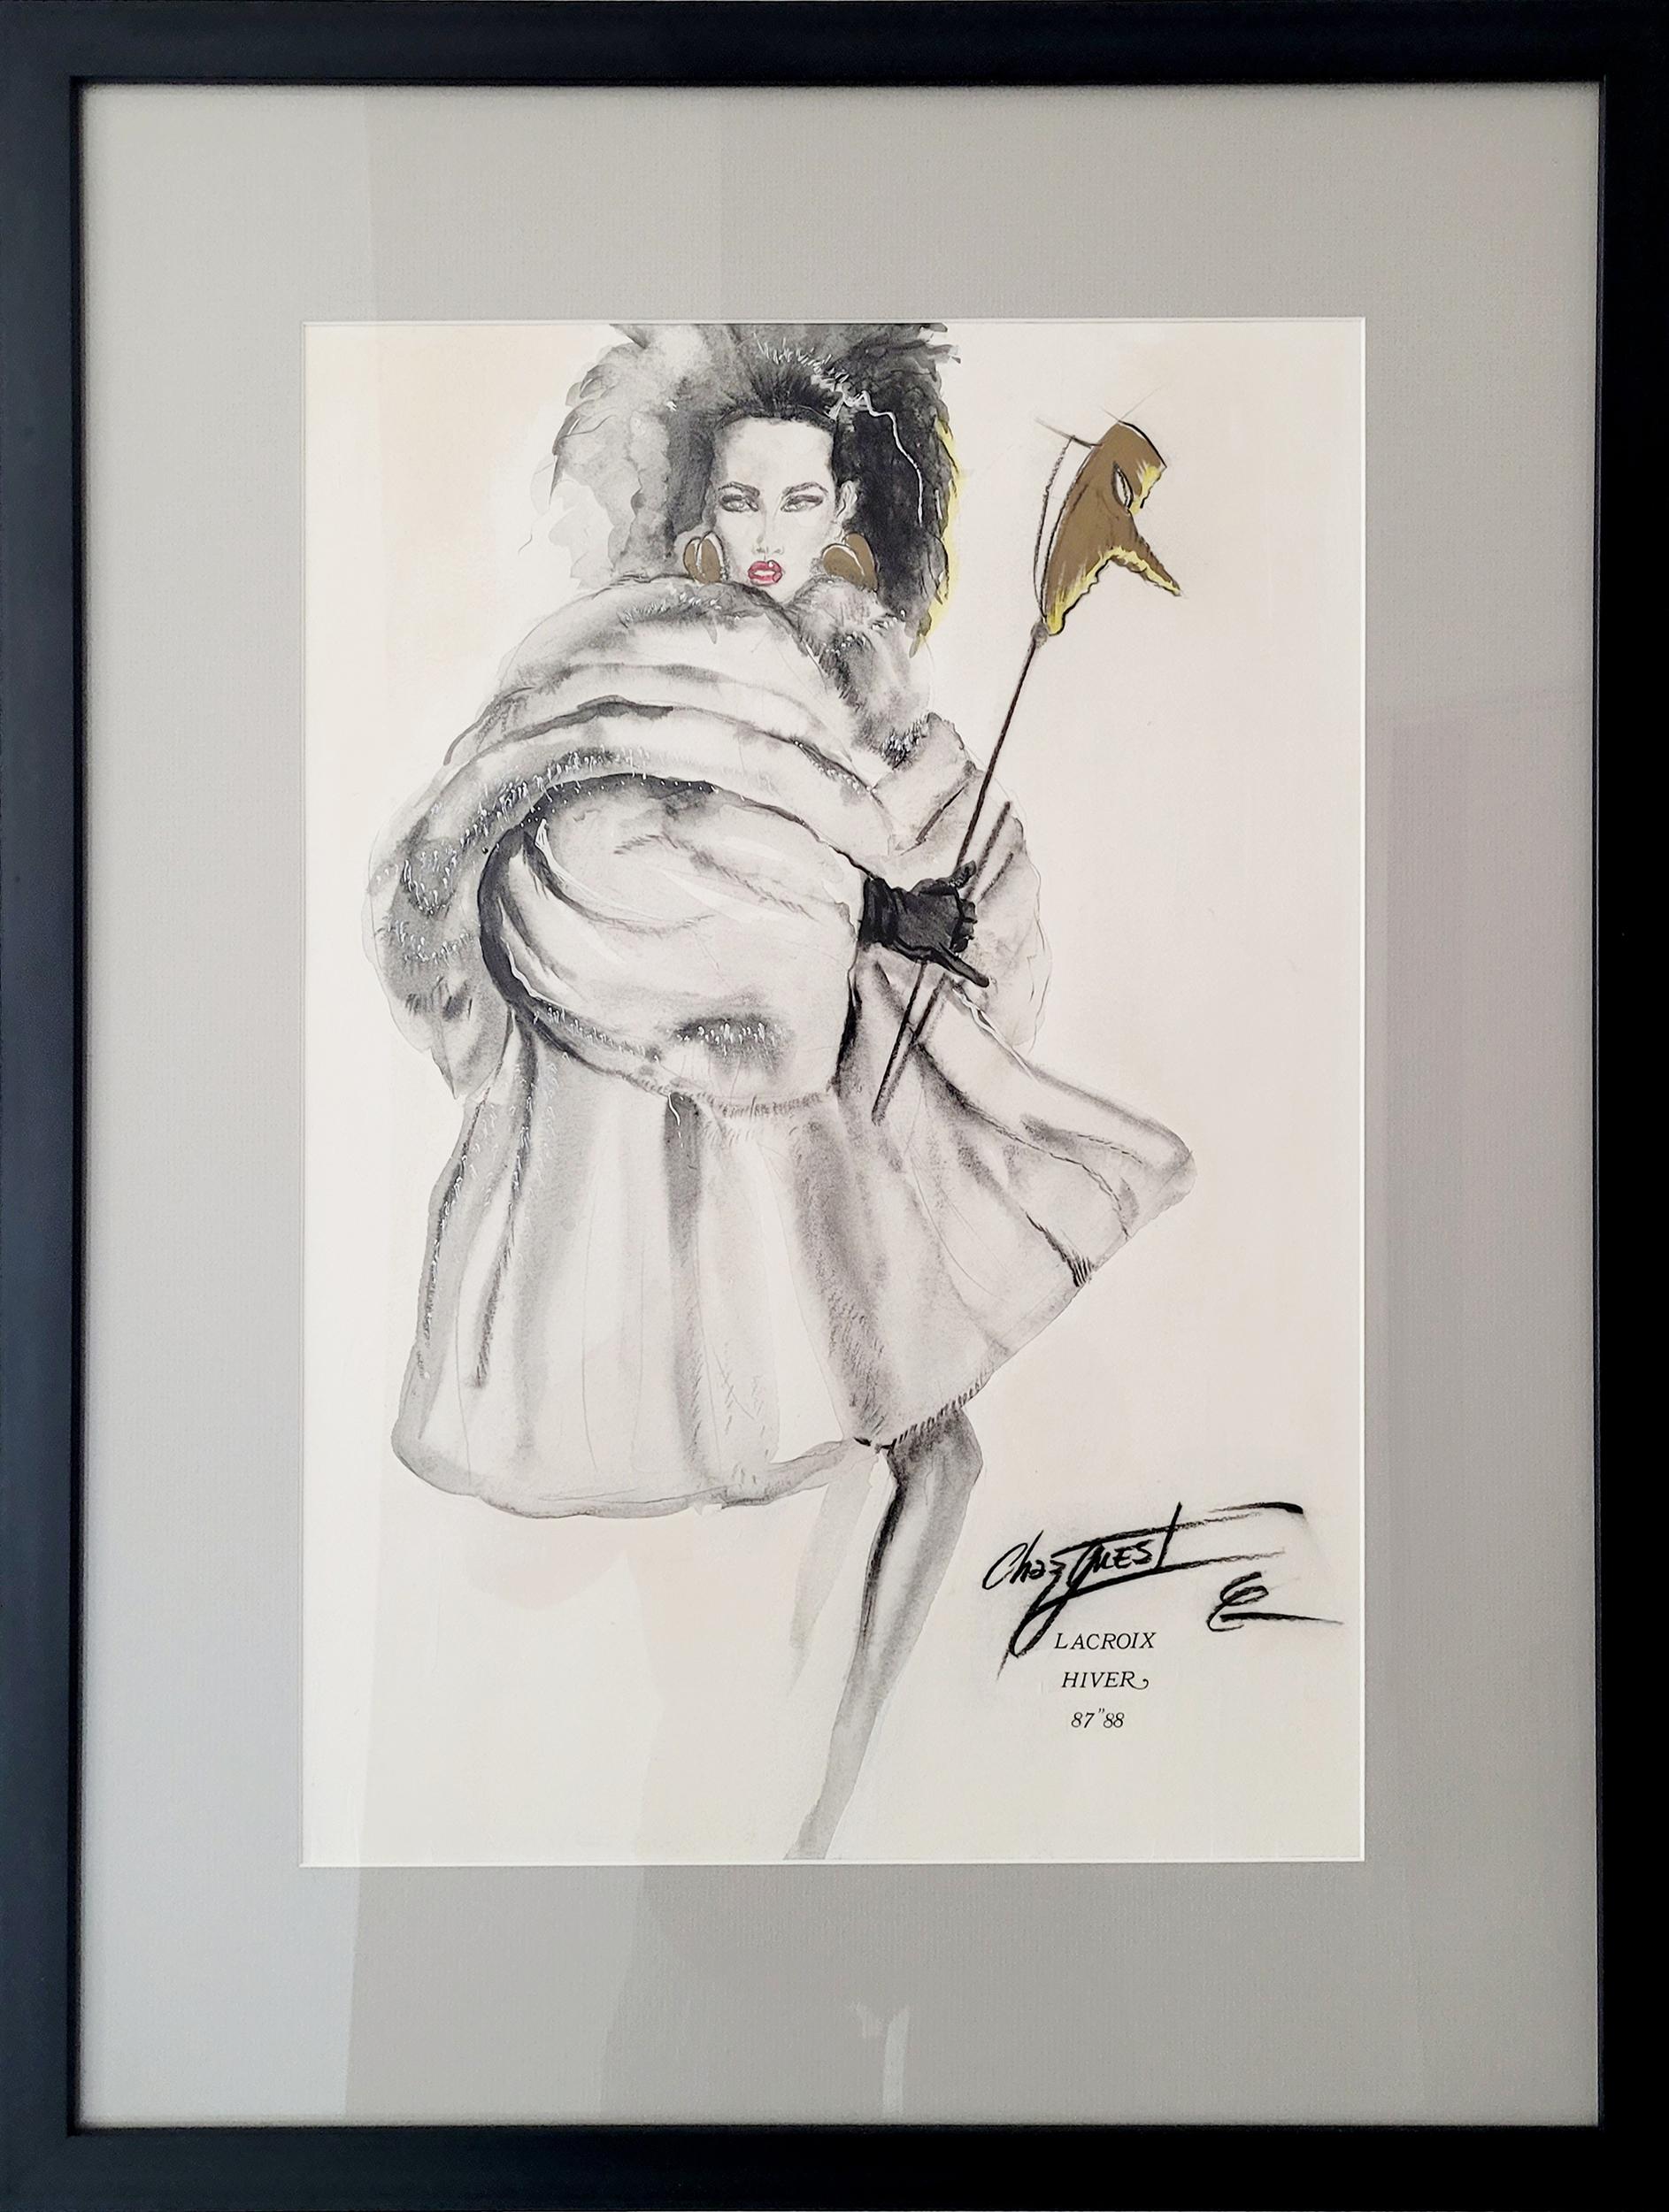 Lacroix Hiver
Chaz Guest, American (1961)
Date: 1987-88
Drawing in pencil, signed
Size: 20.5 x 14.5 in. (52.07 x 36.83 cm)
Frame Size: 27.5 x 21 inches